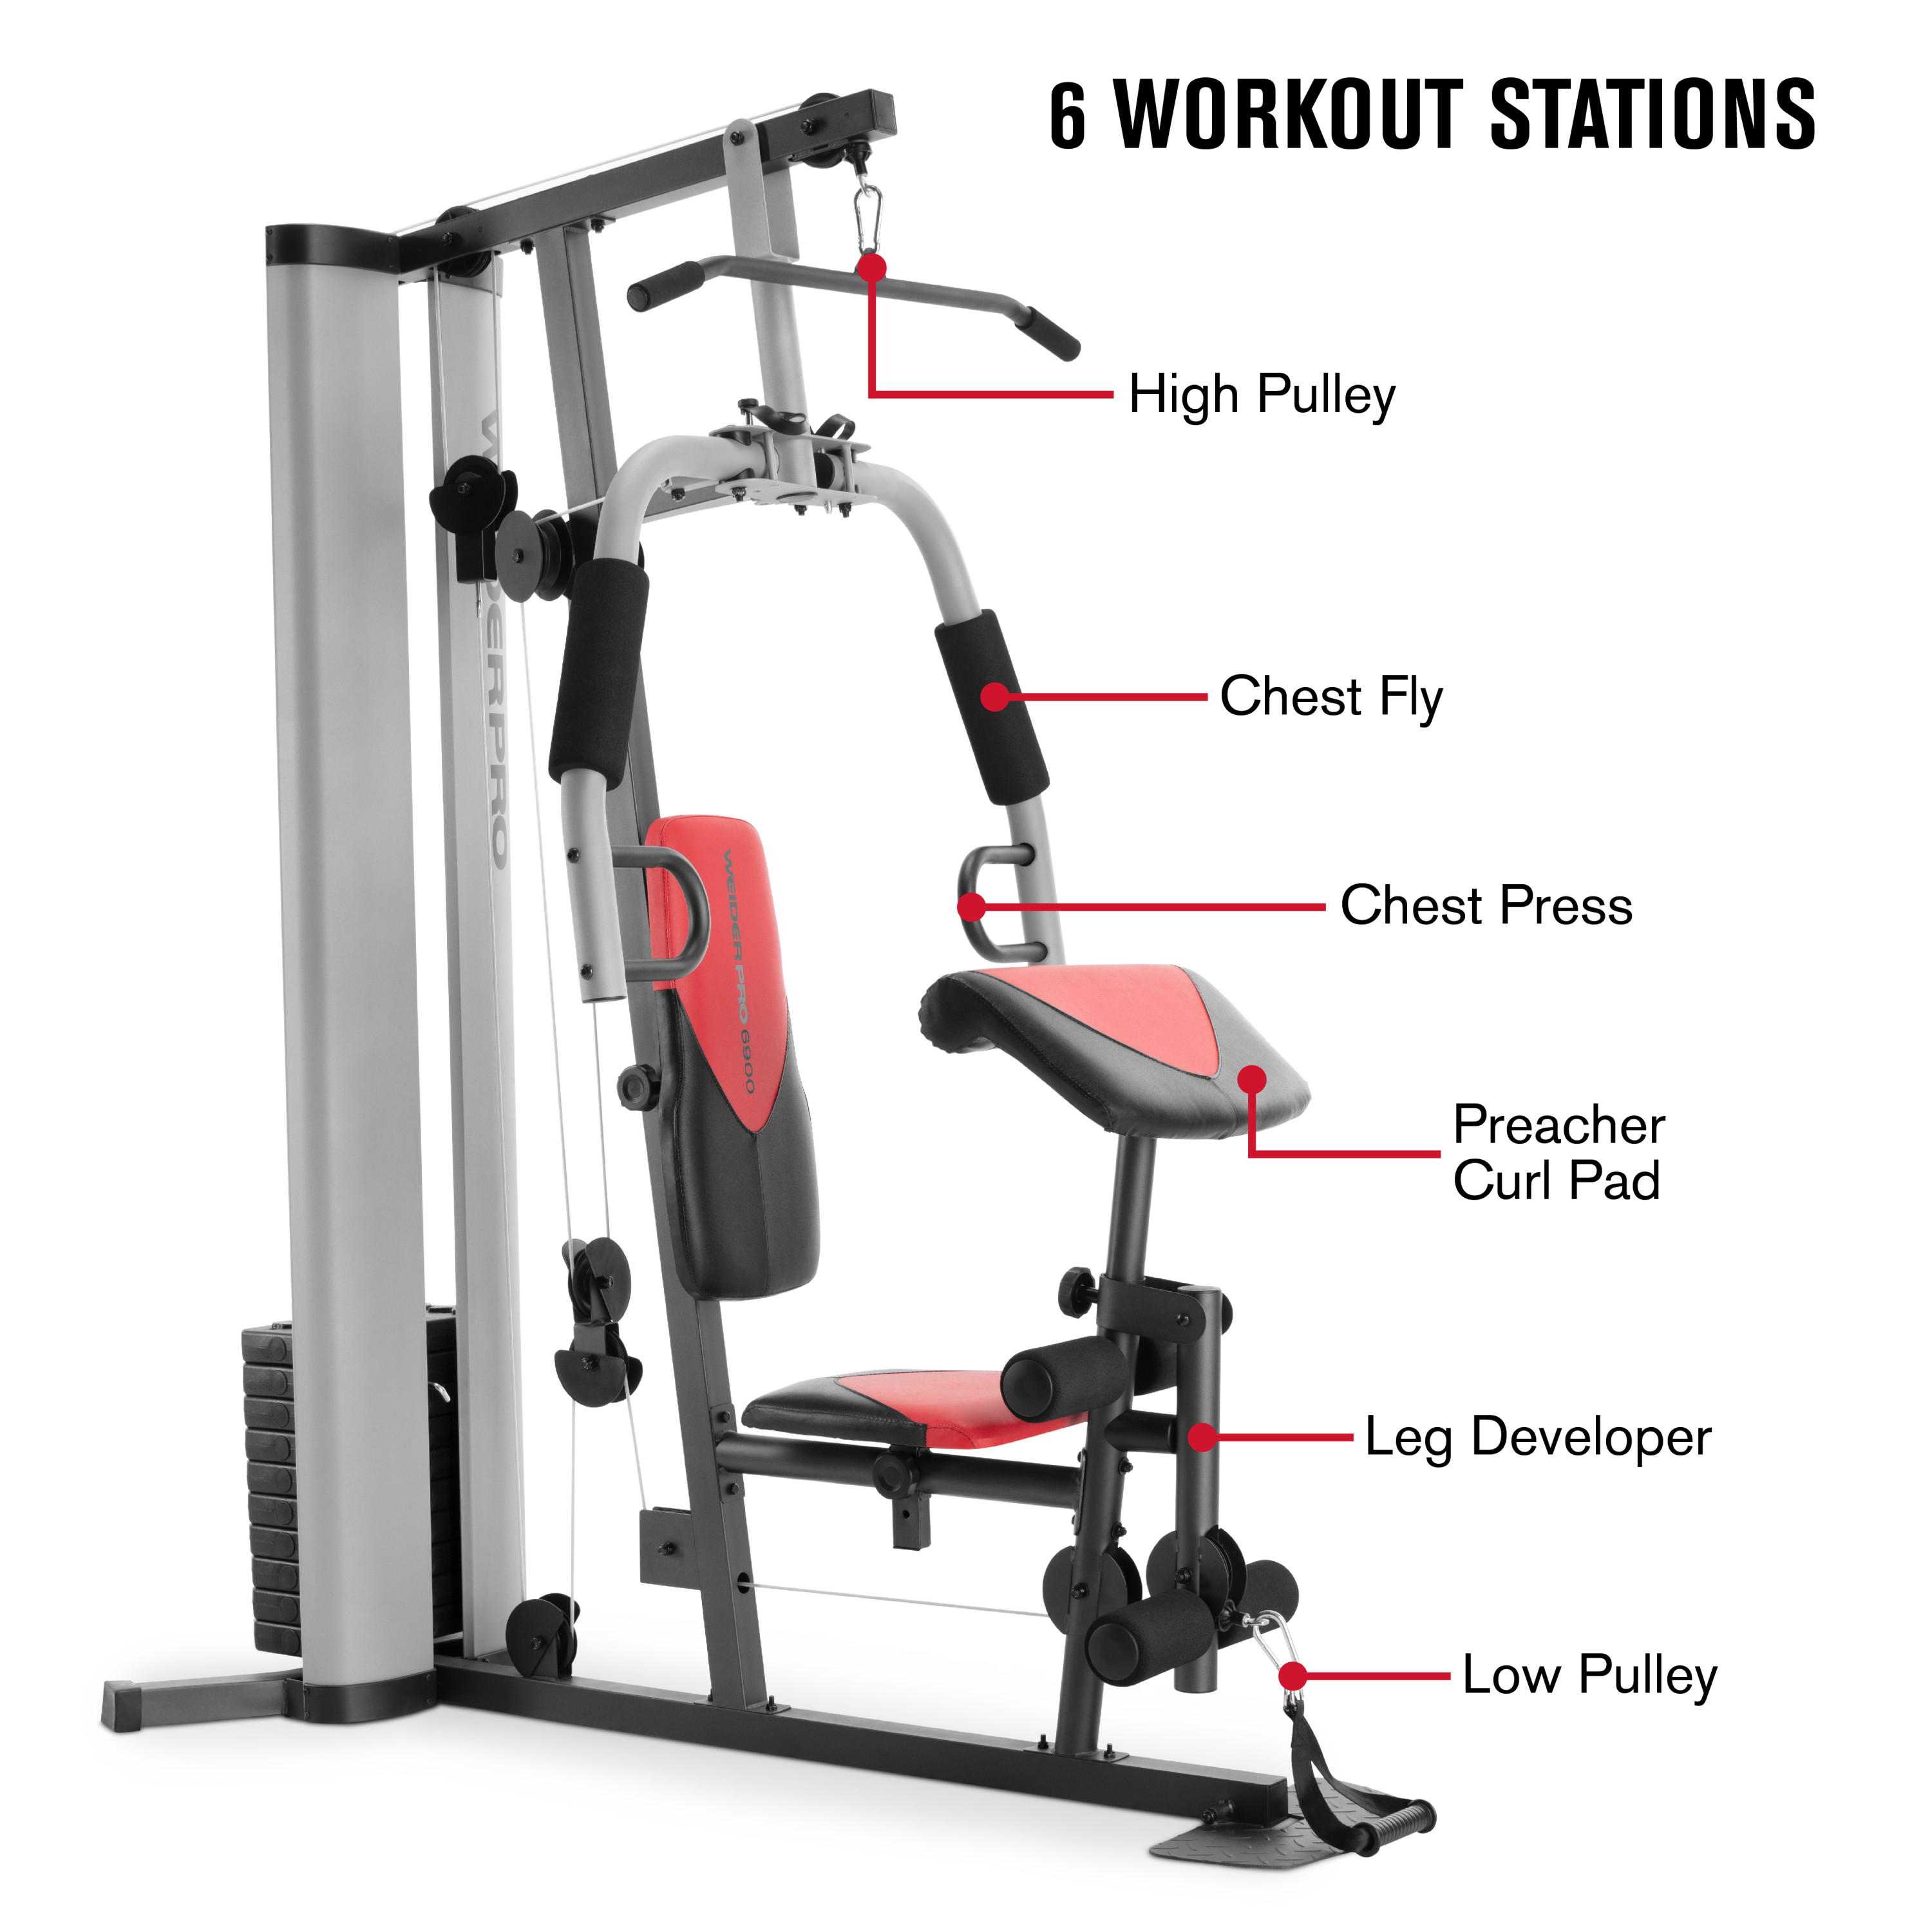 Weider Pro 6900 Home Gym System with 125 Lb. Weight Stack - image 4 of 39